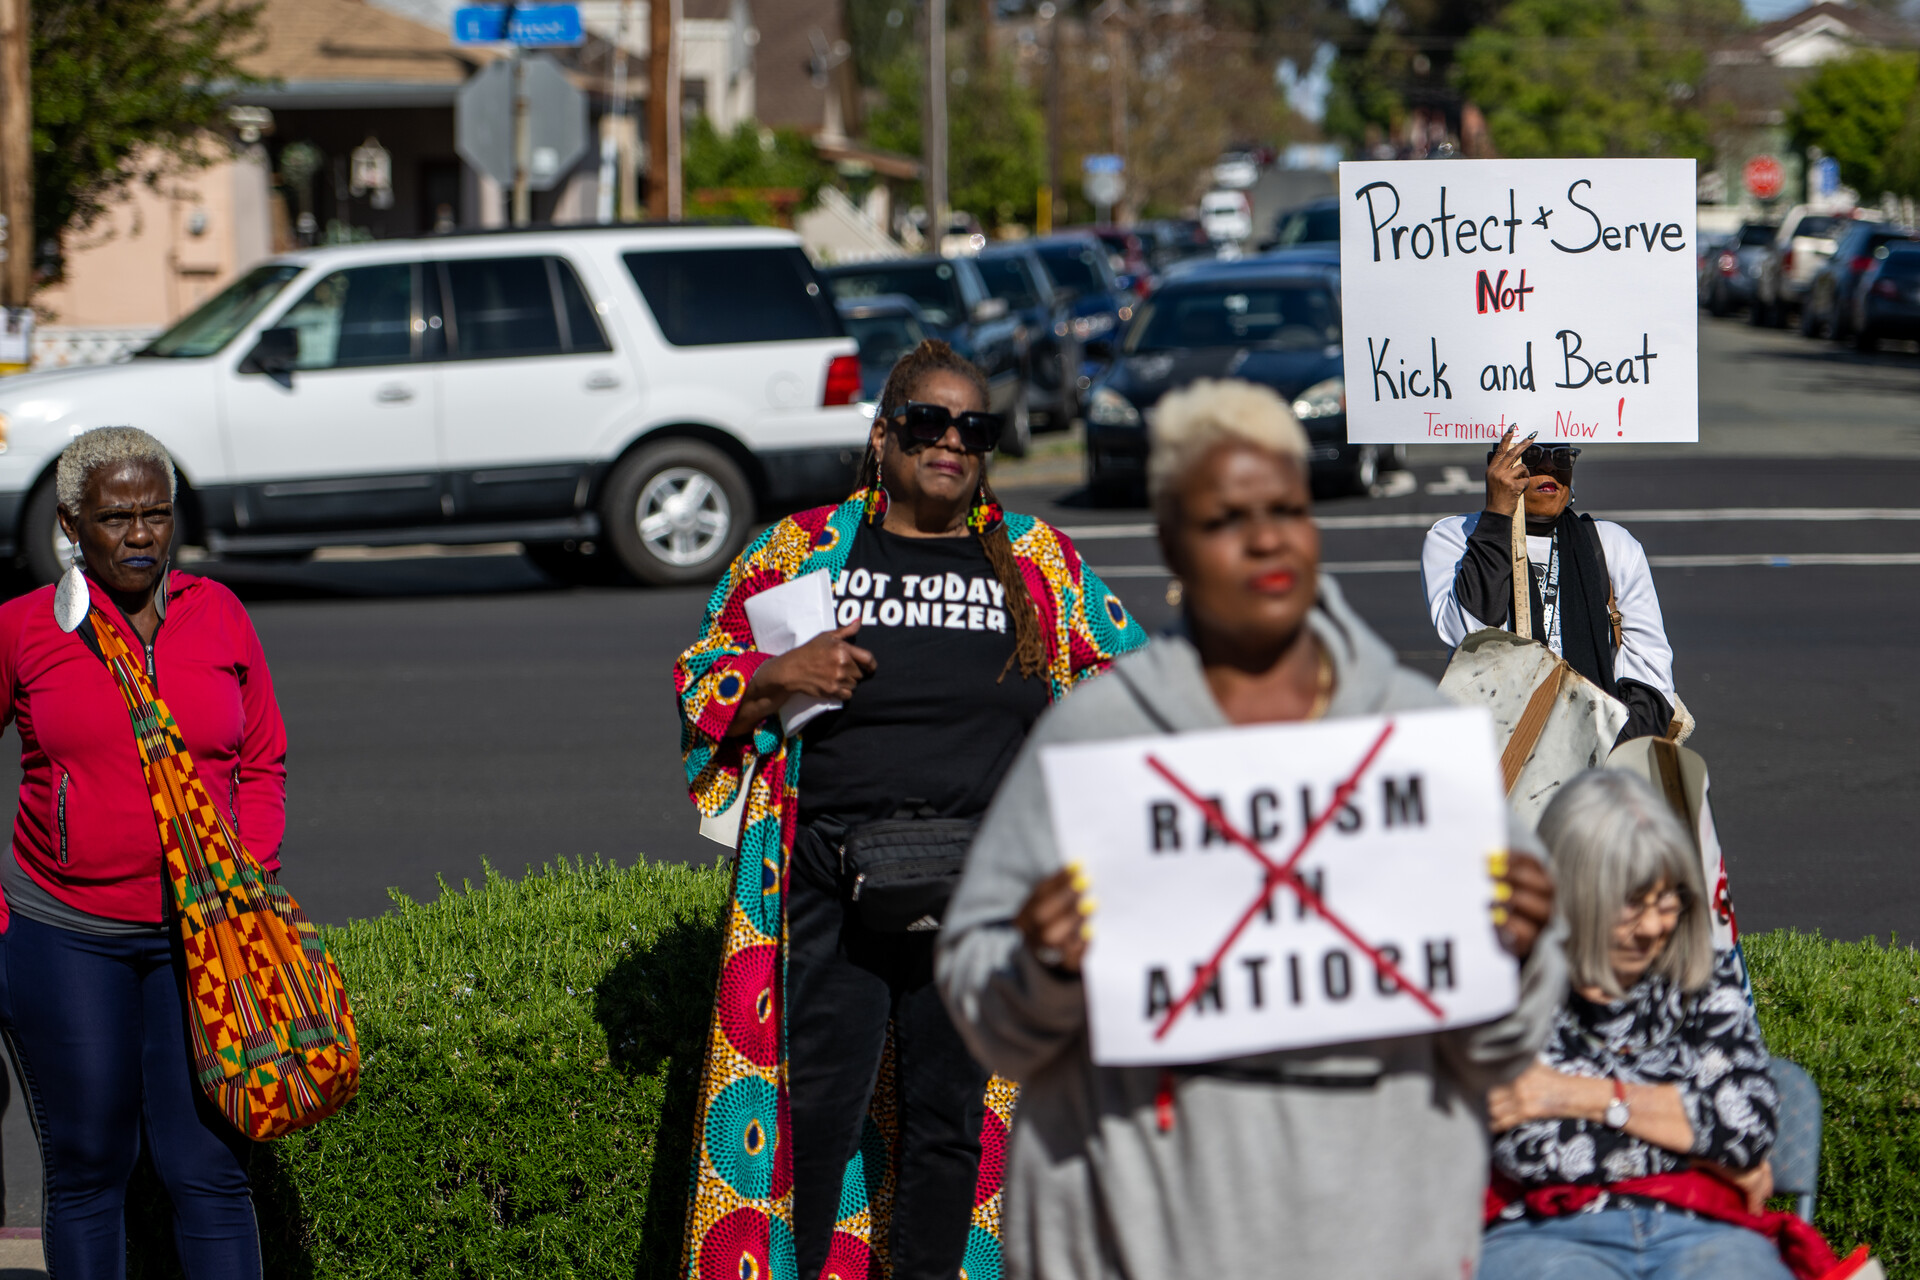 A small group of Black women stand on the sidewalk holding signs and protesting racism among police in Antioch.